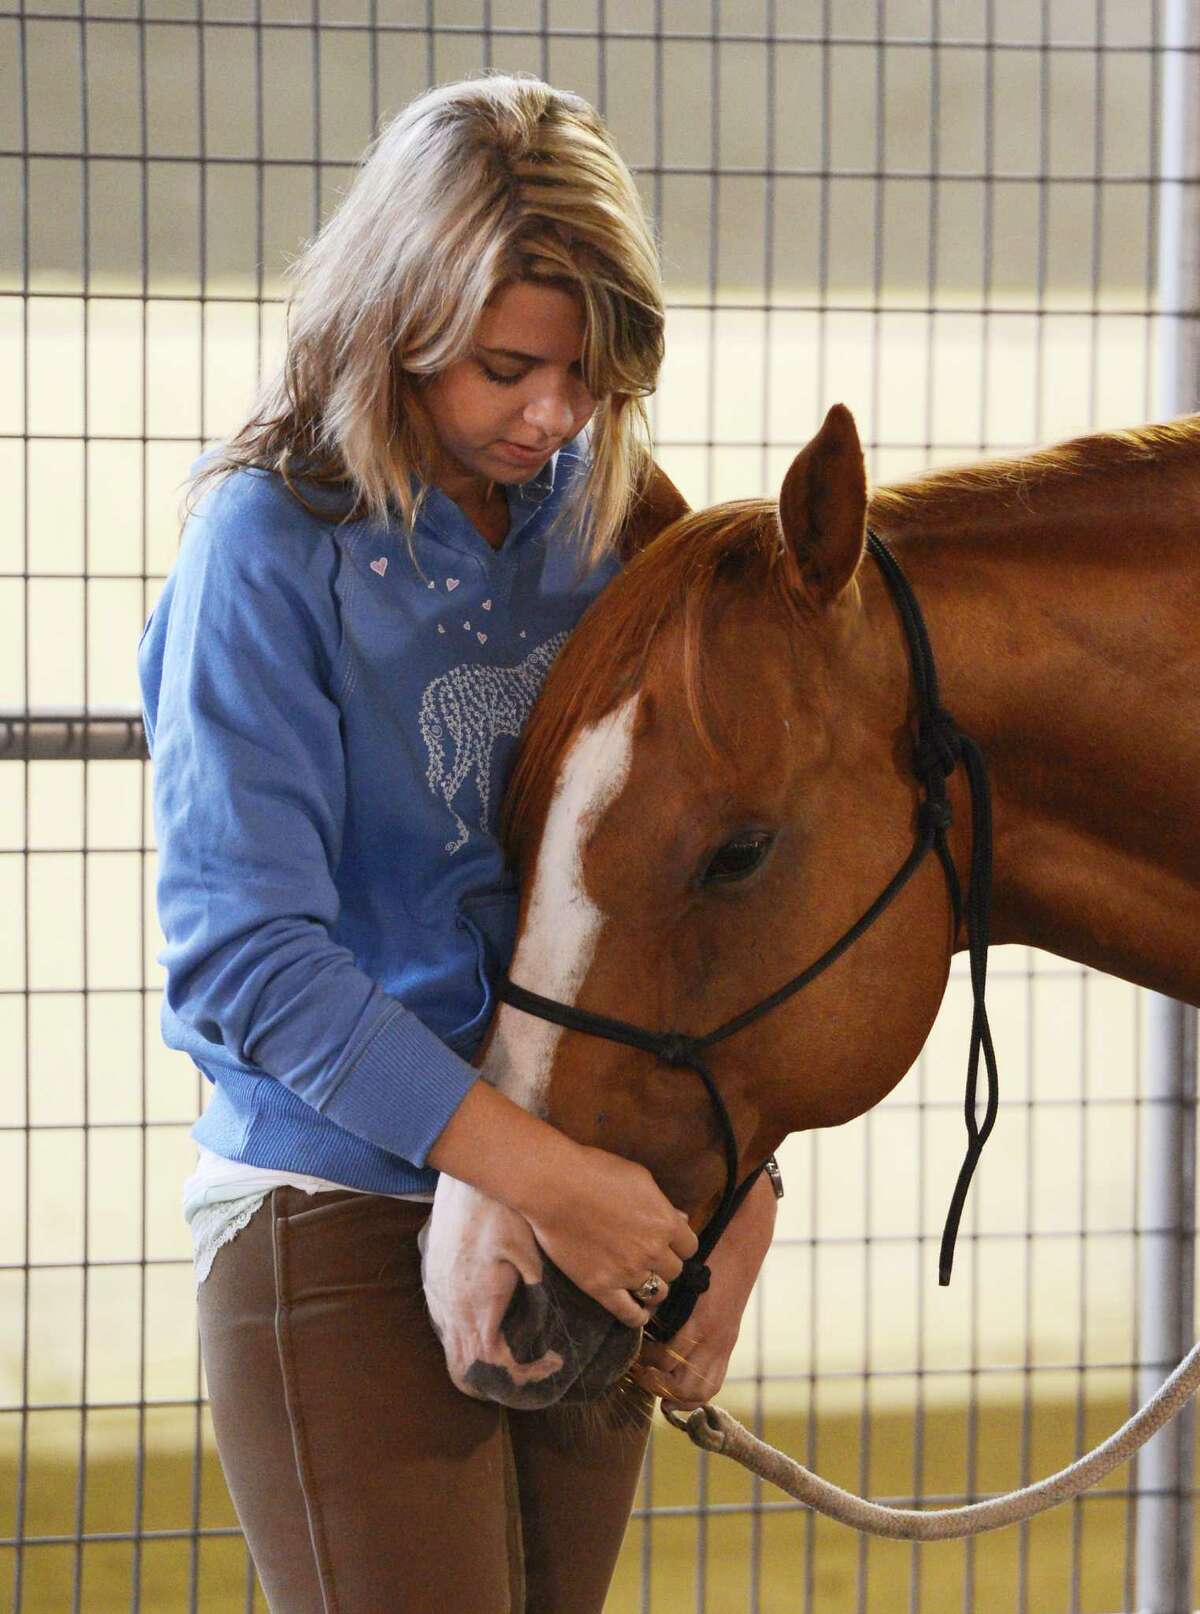 Military suicide widow Rebecca Morrison, has a quiet moment with Butter during her introduction to the Saratoga War Horse Program in Saratoga Springs, N.Y. July 26, 2012 (Skip Dickstein/Times Union)